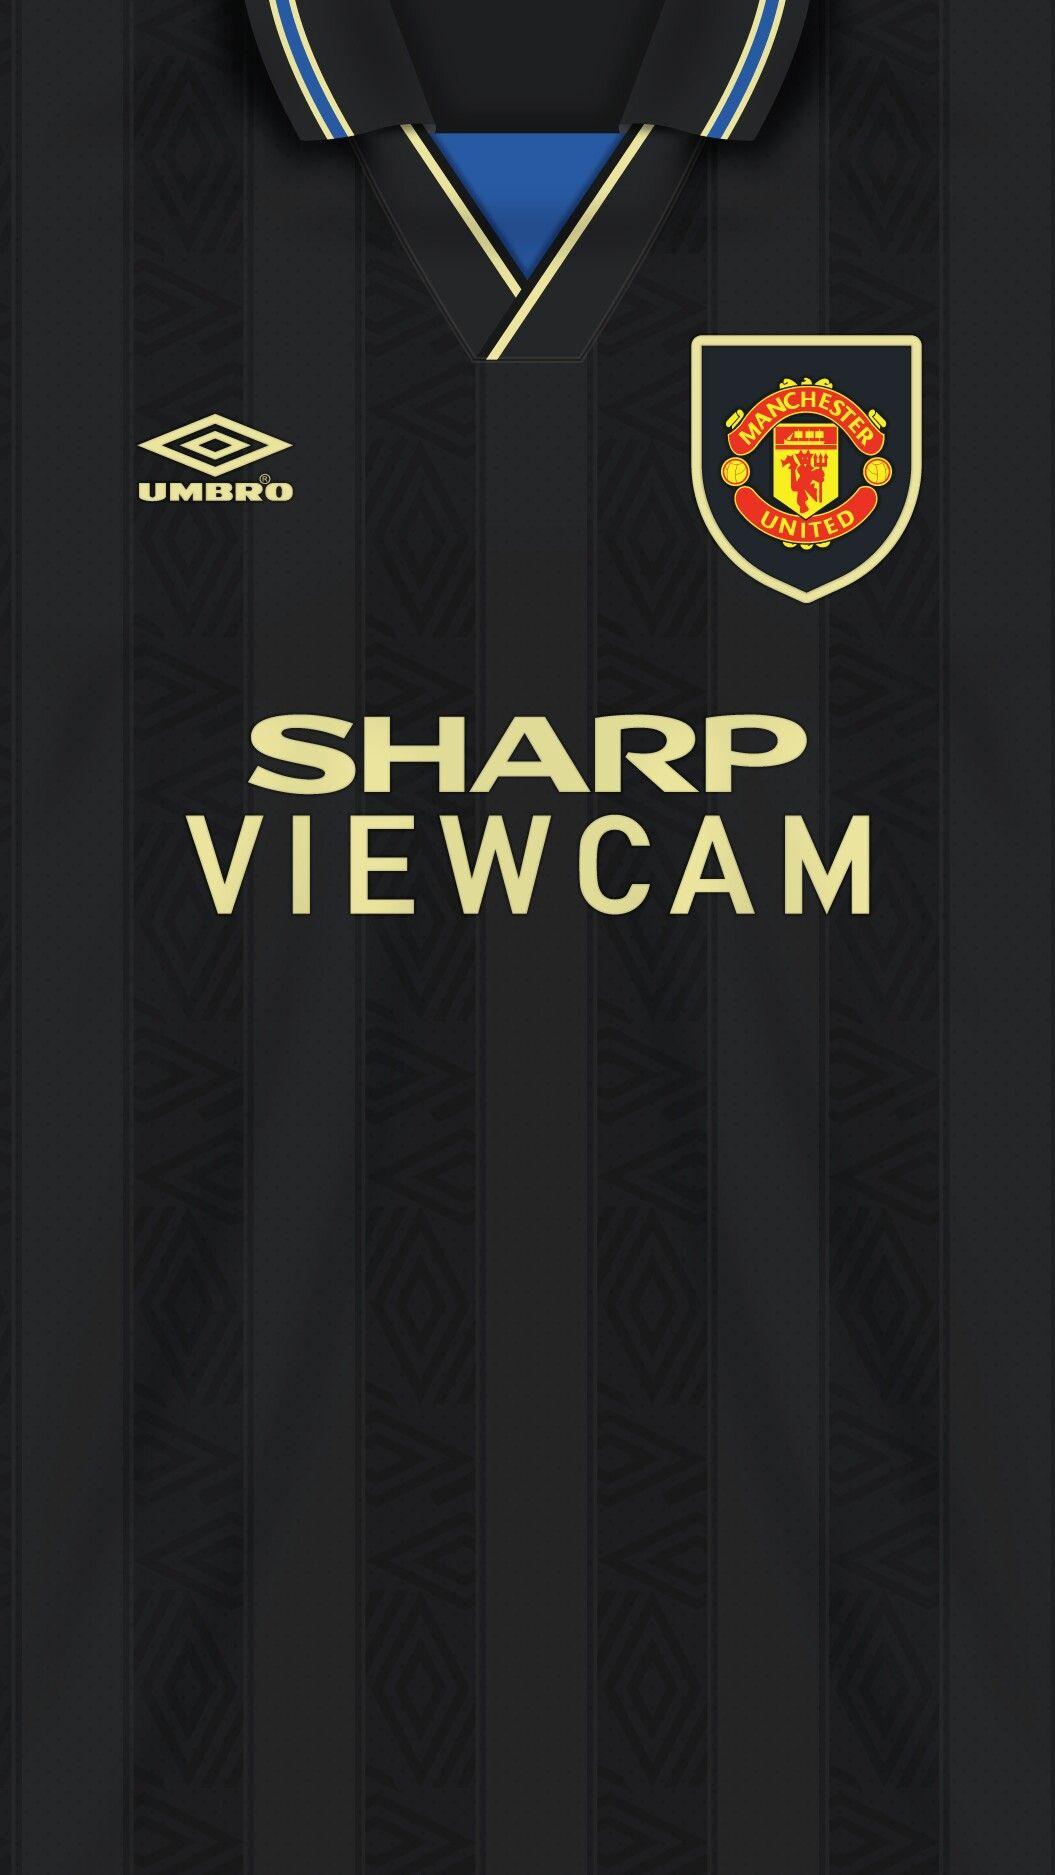 Manchester United Kit Wallpapers